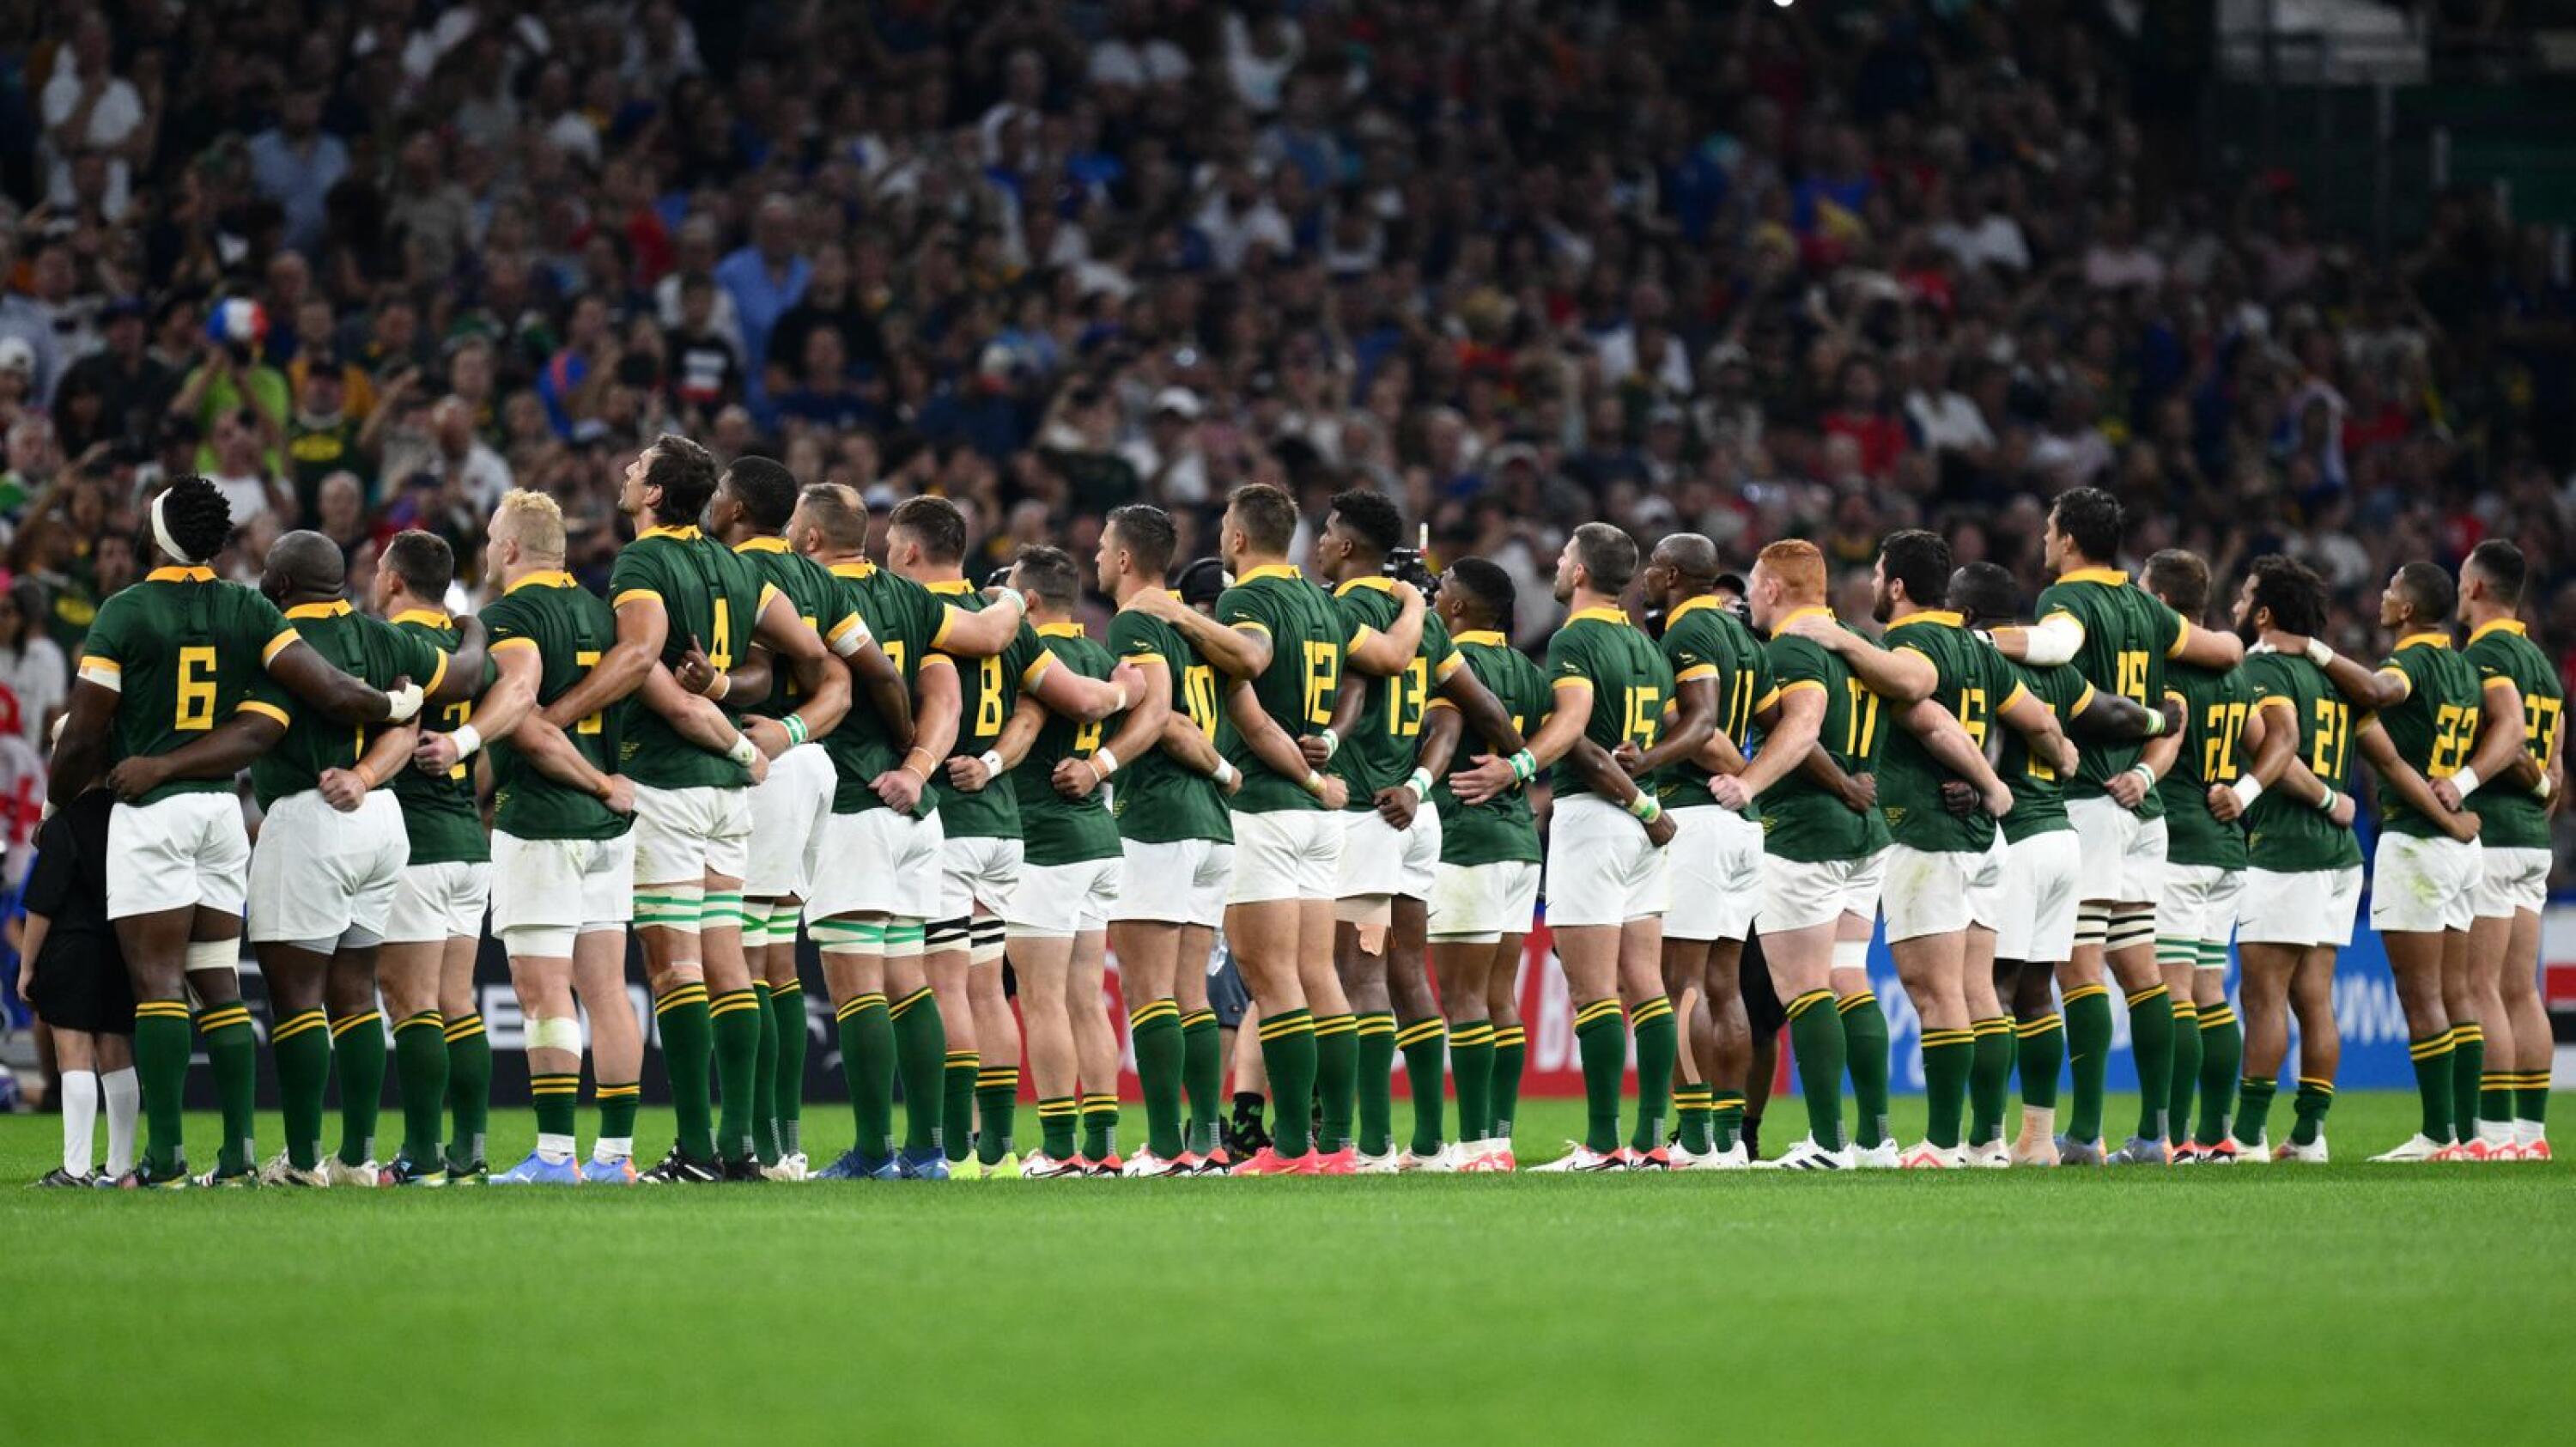 The Springboks line up for the national anthem ahead of their Rugby World Cup Pool B match against Tonga